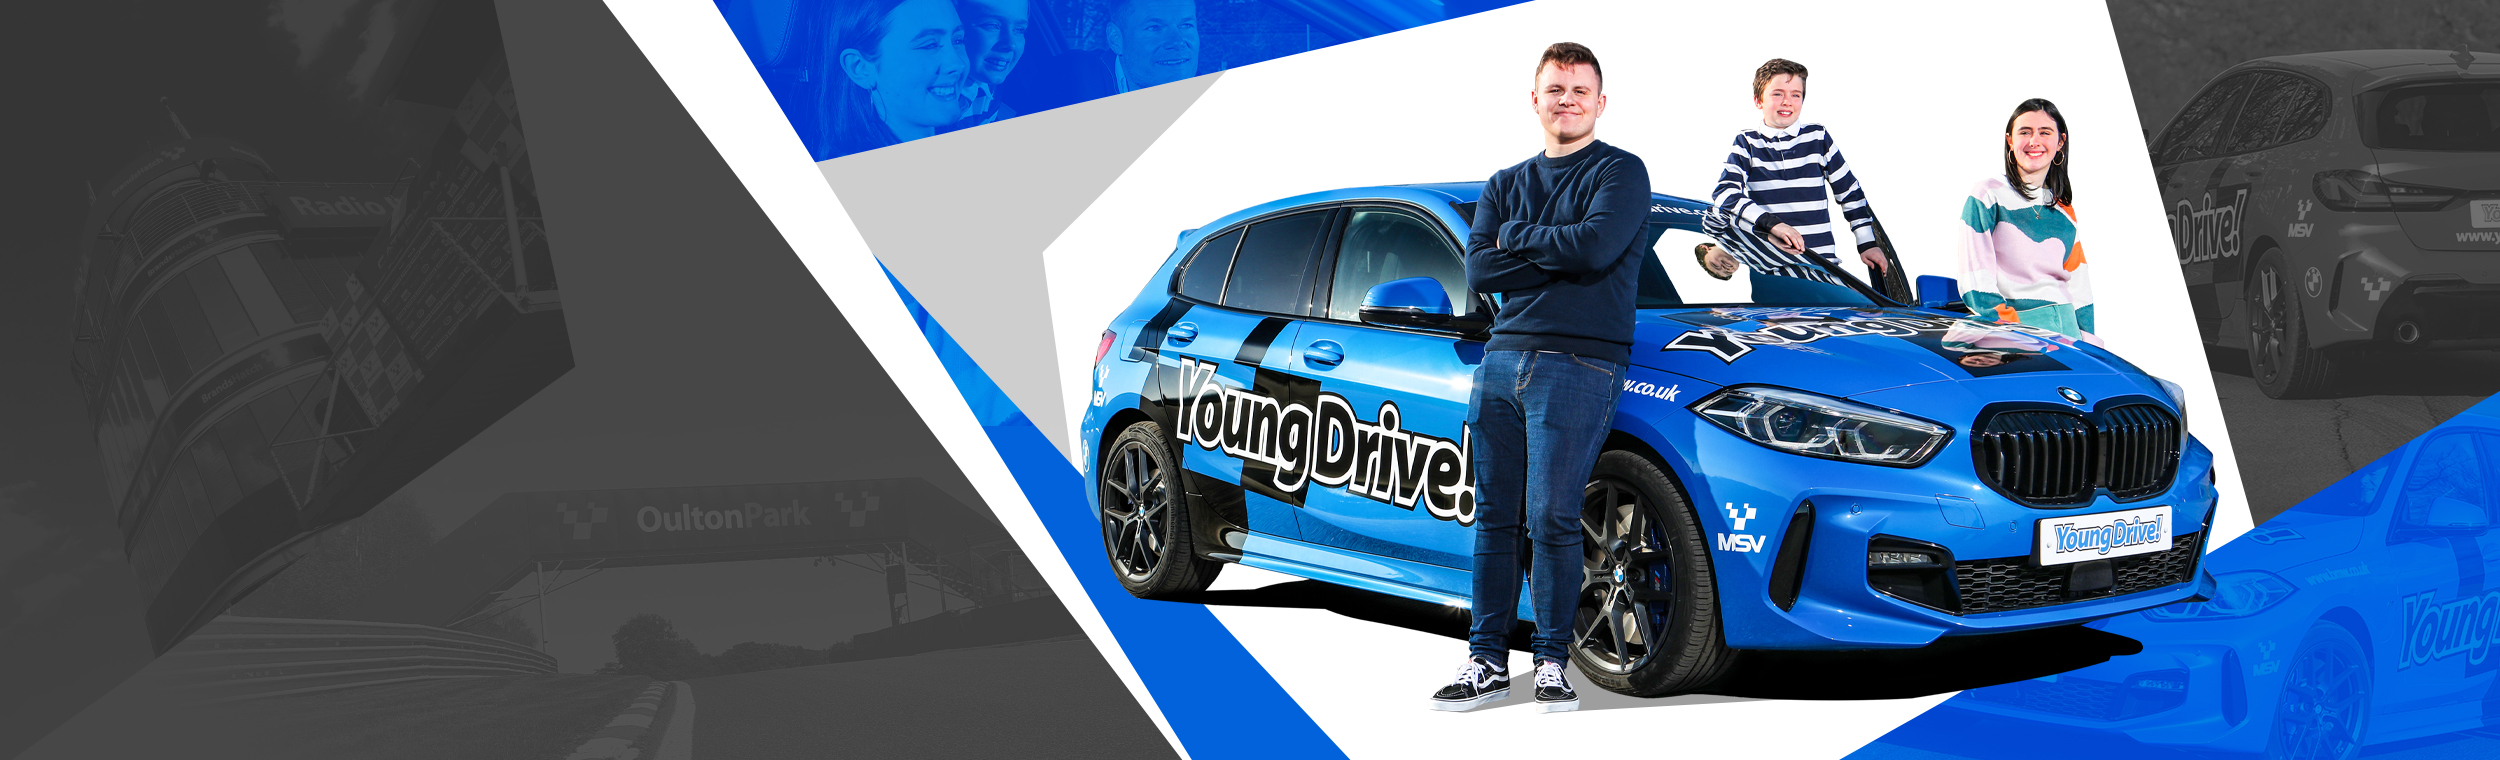 YoungDrive!